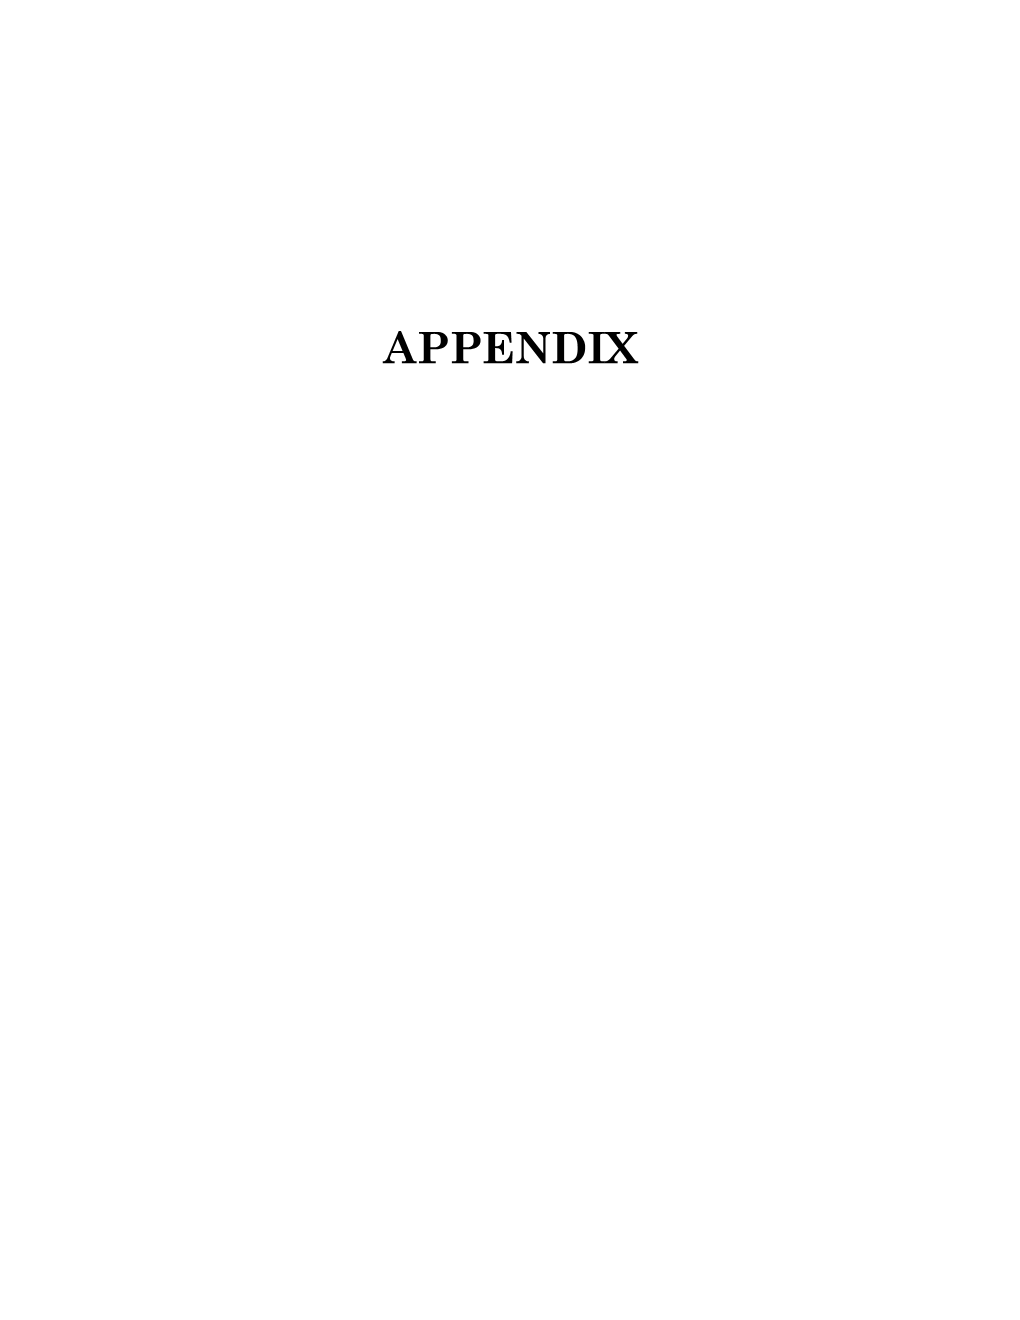 APPENDIX TABLE of APPENDICES Appendix a Opinion, United States Court of Appeals for the Ninth Circuit, Thompson V